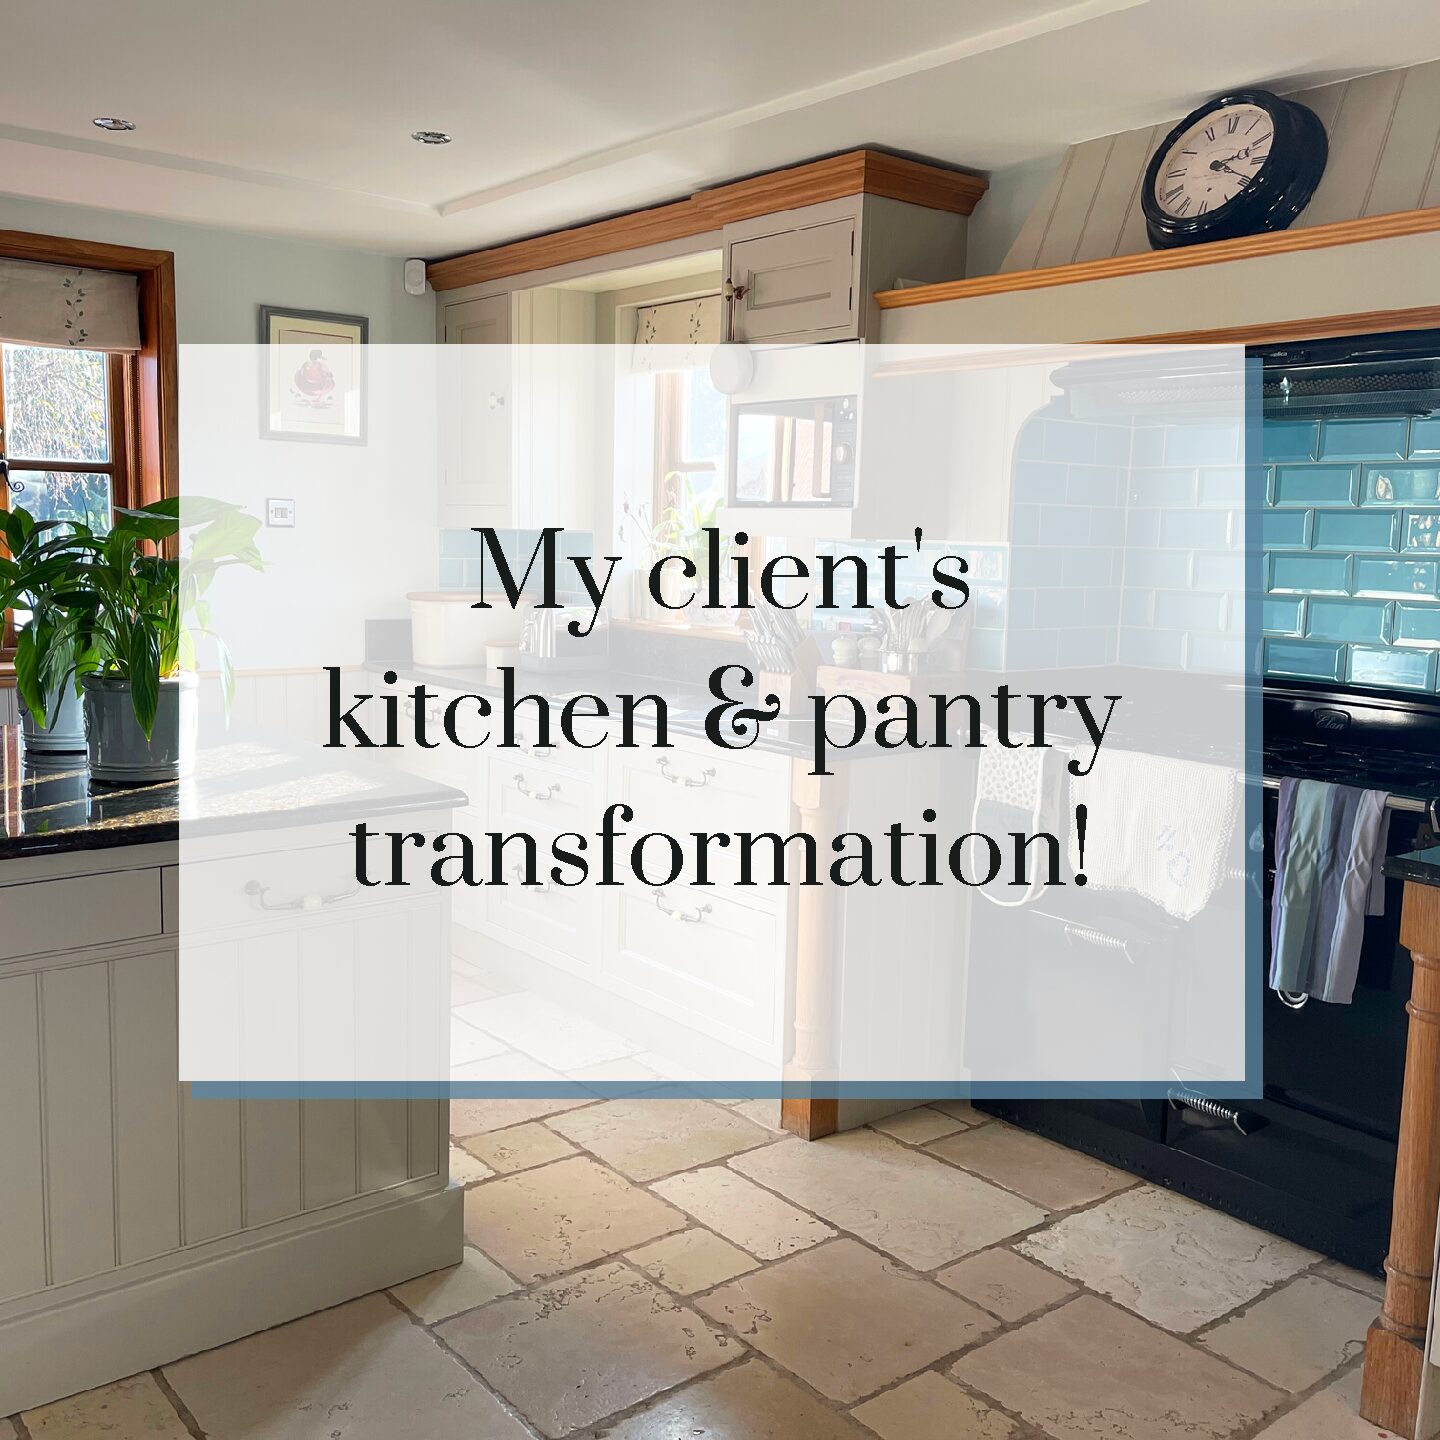 My client’s kitchen & pantry transformation!